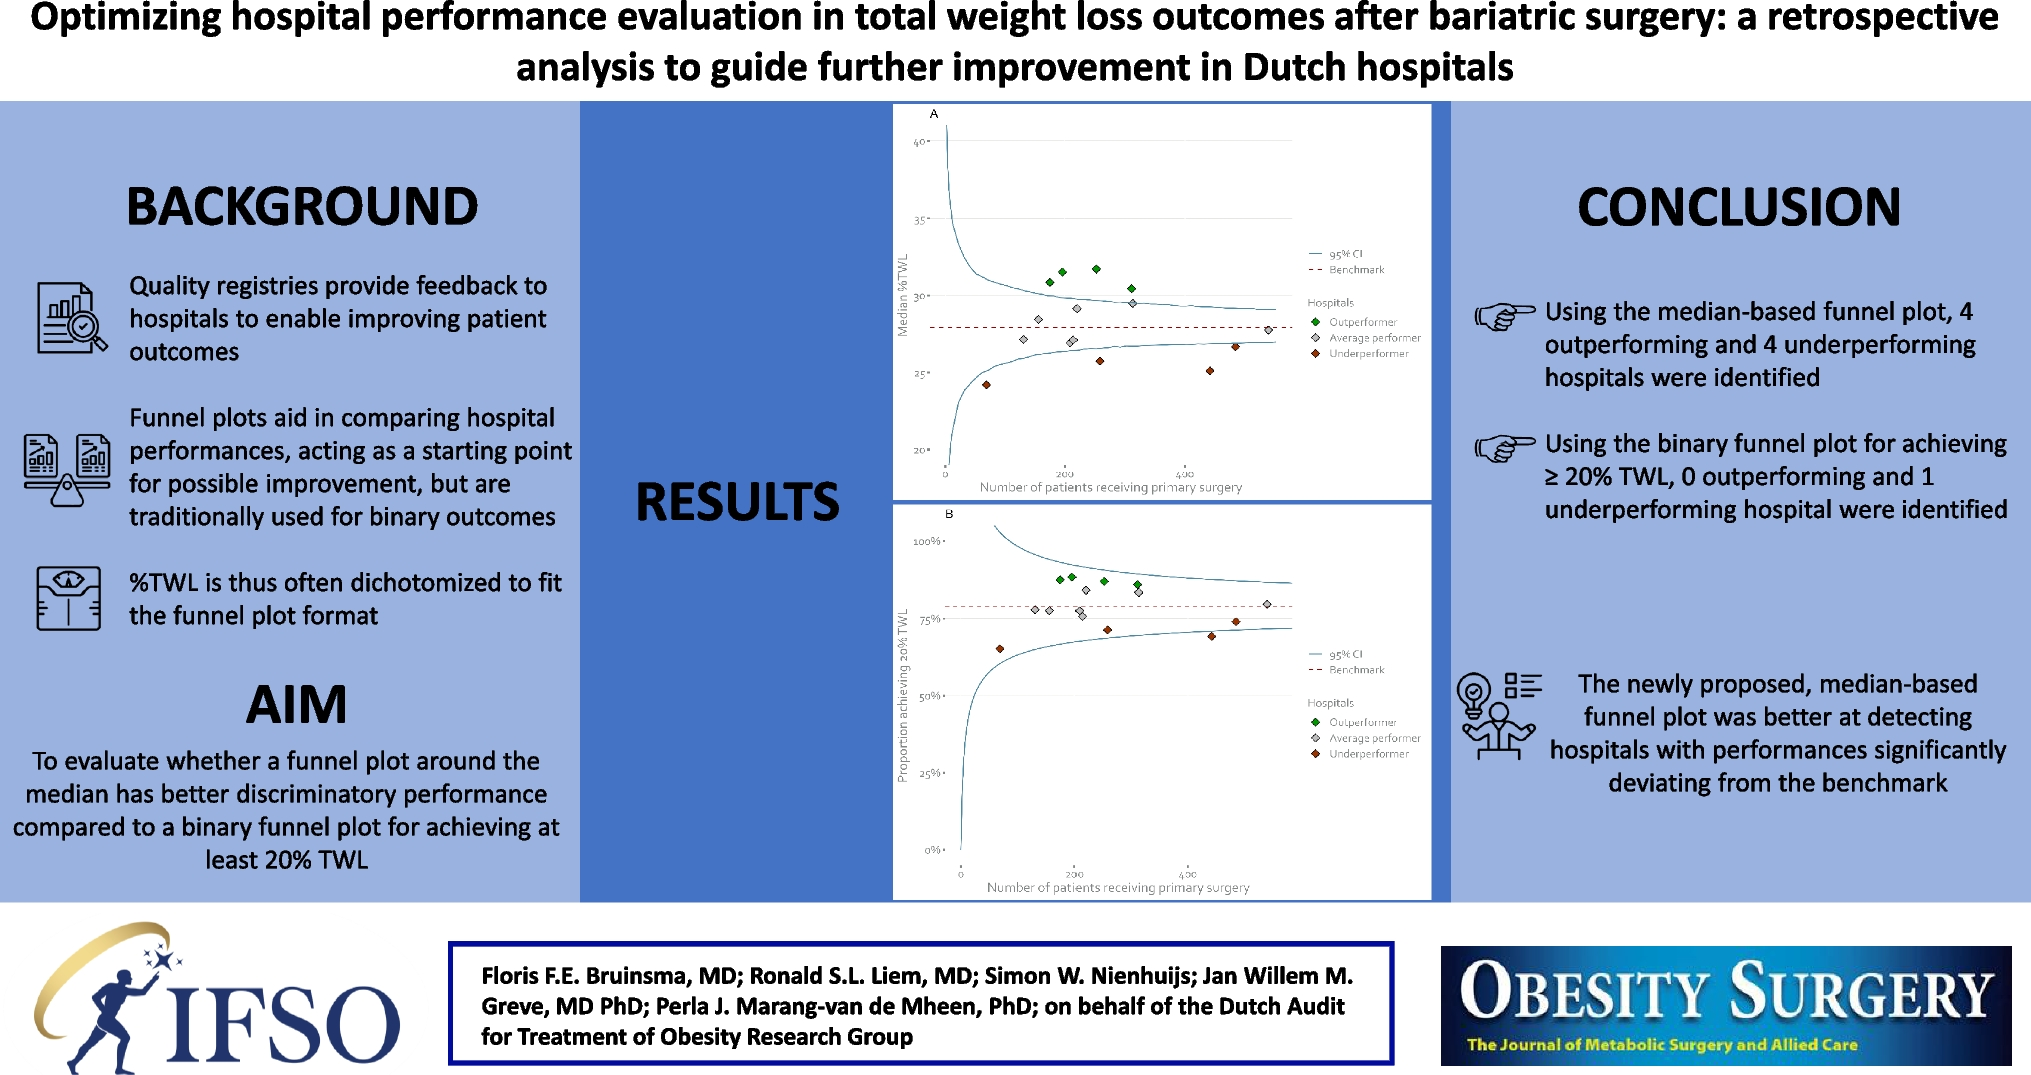 Optimizing Hospital Performance Evaluation in Total Weight Loss Outcomes After Bariatric Surgery: A Retrospective Analysis to Guide Further Improvement in Dutch Hospitals